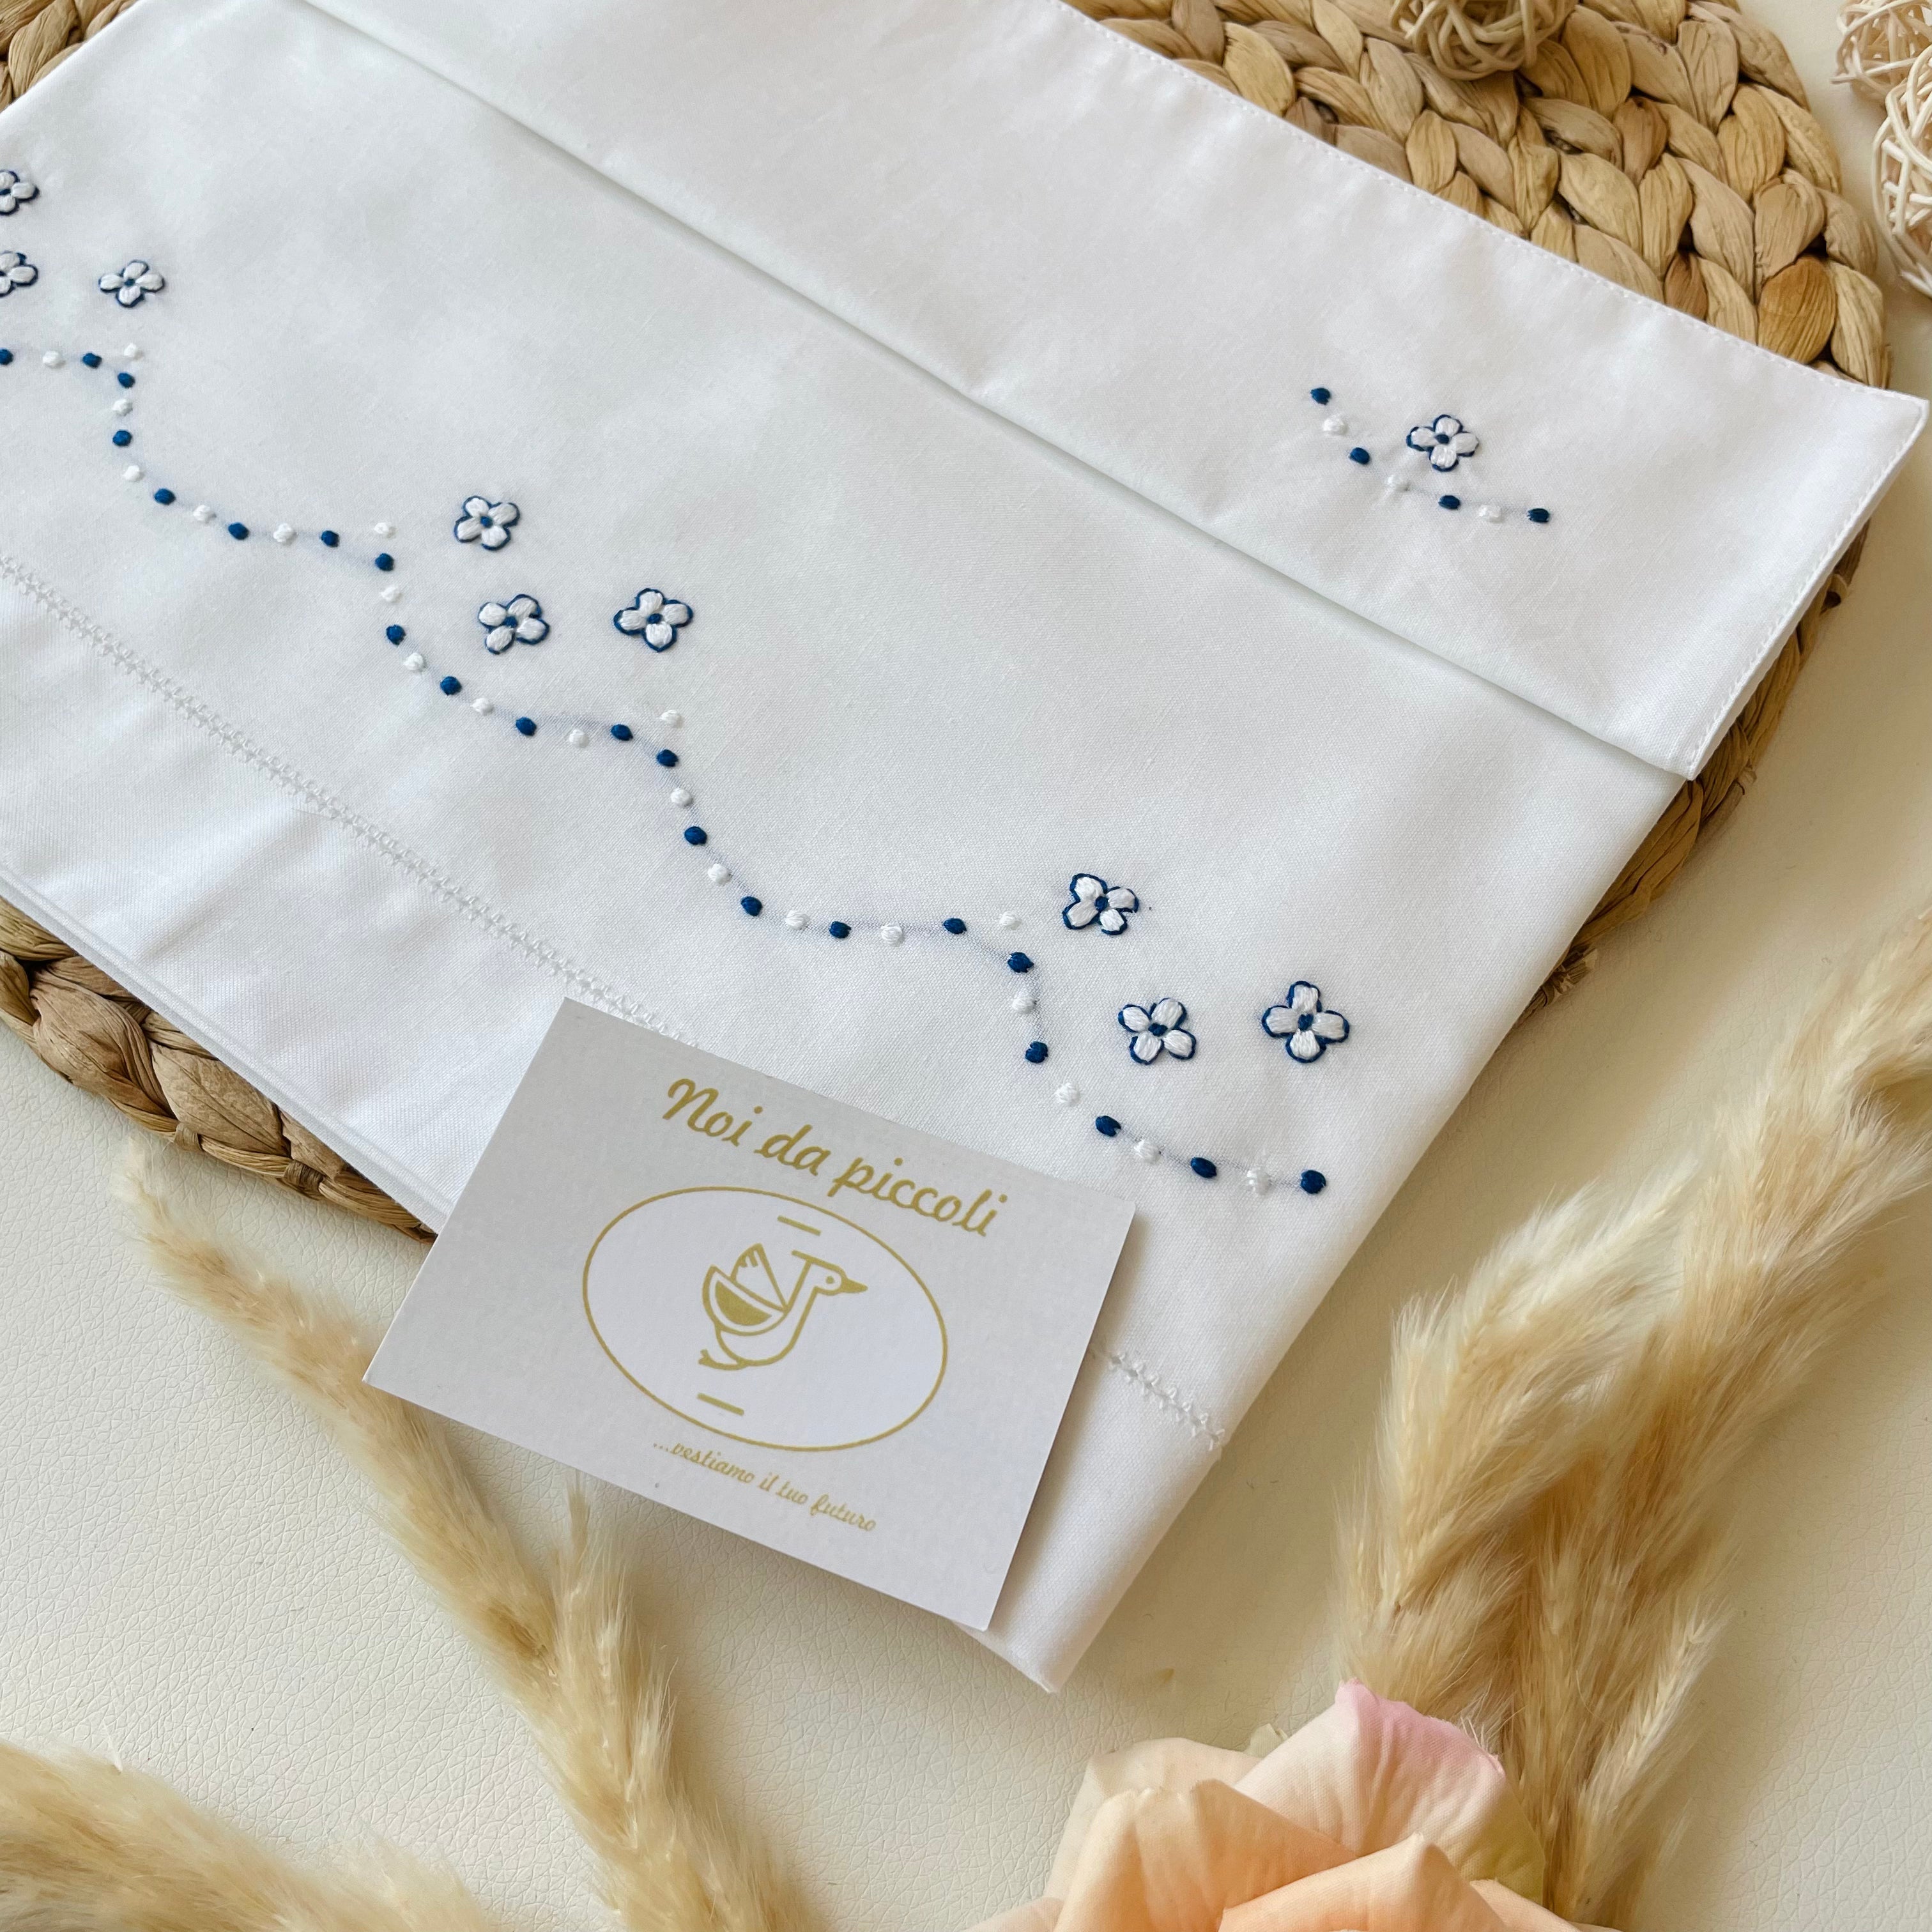 HAND EMBROIDERED SHEET SET WITH FLOWERS WITH NAVI BORDER